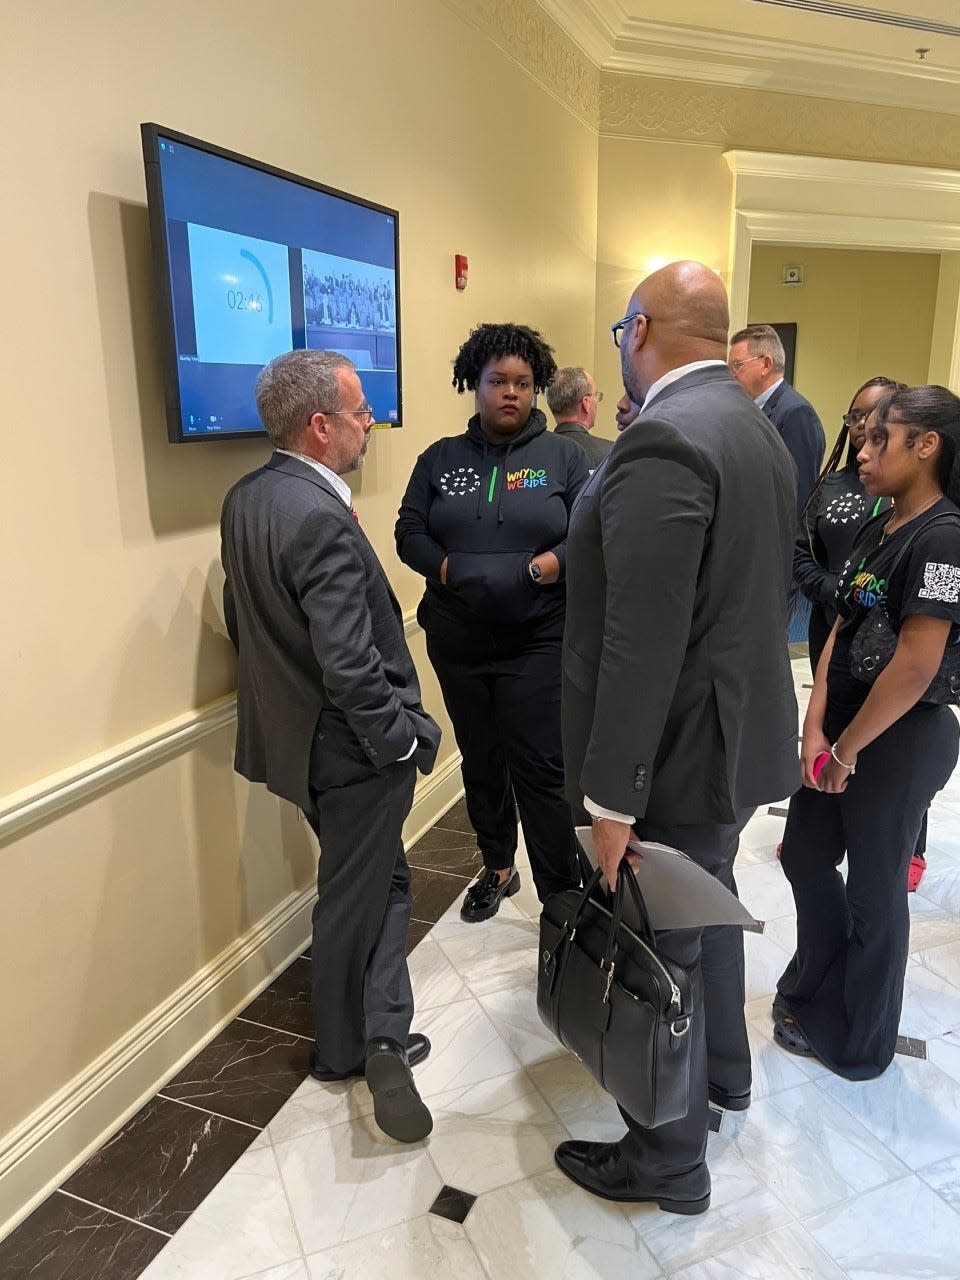 Del. William Wivell, R-Washington, left, speaks with Brittany Young, center, and members of the B-360 organization, which works with young riders outside the hearing room in Annapolis on March 2, 2023. Young received funding from Harris' Baltimore Corps to start B-360.